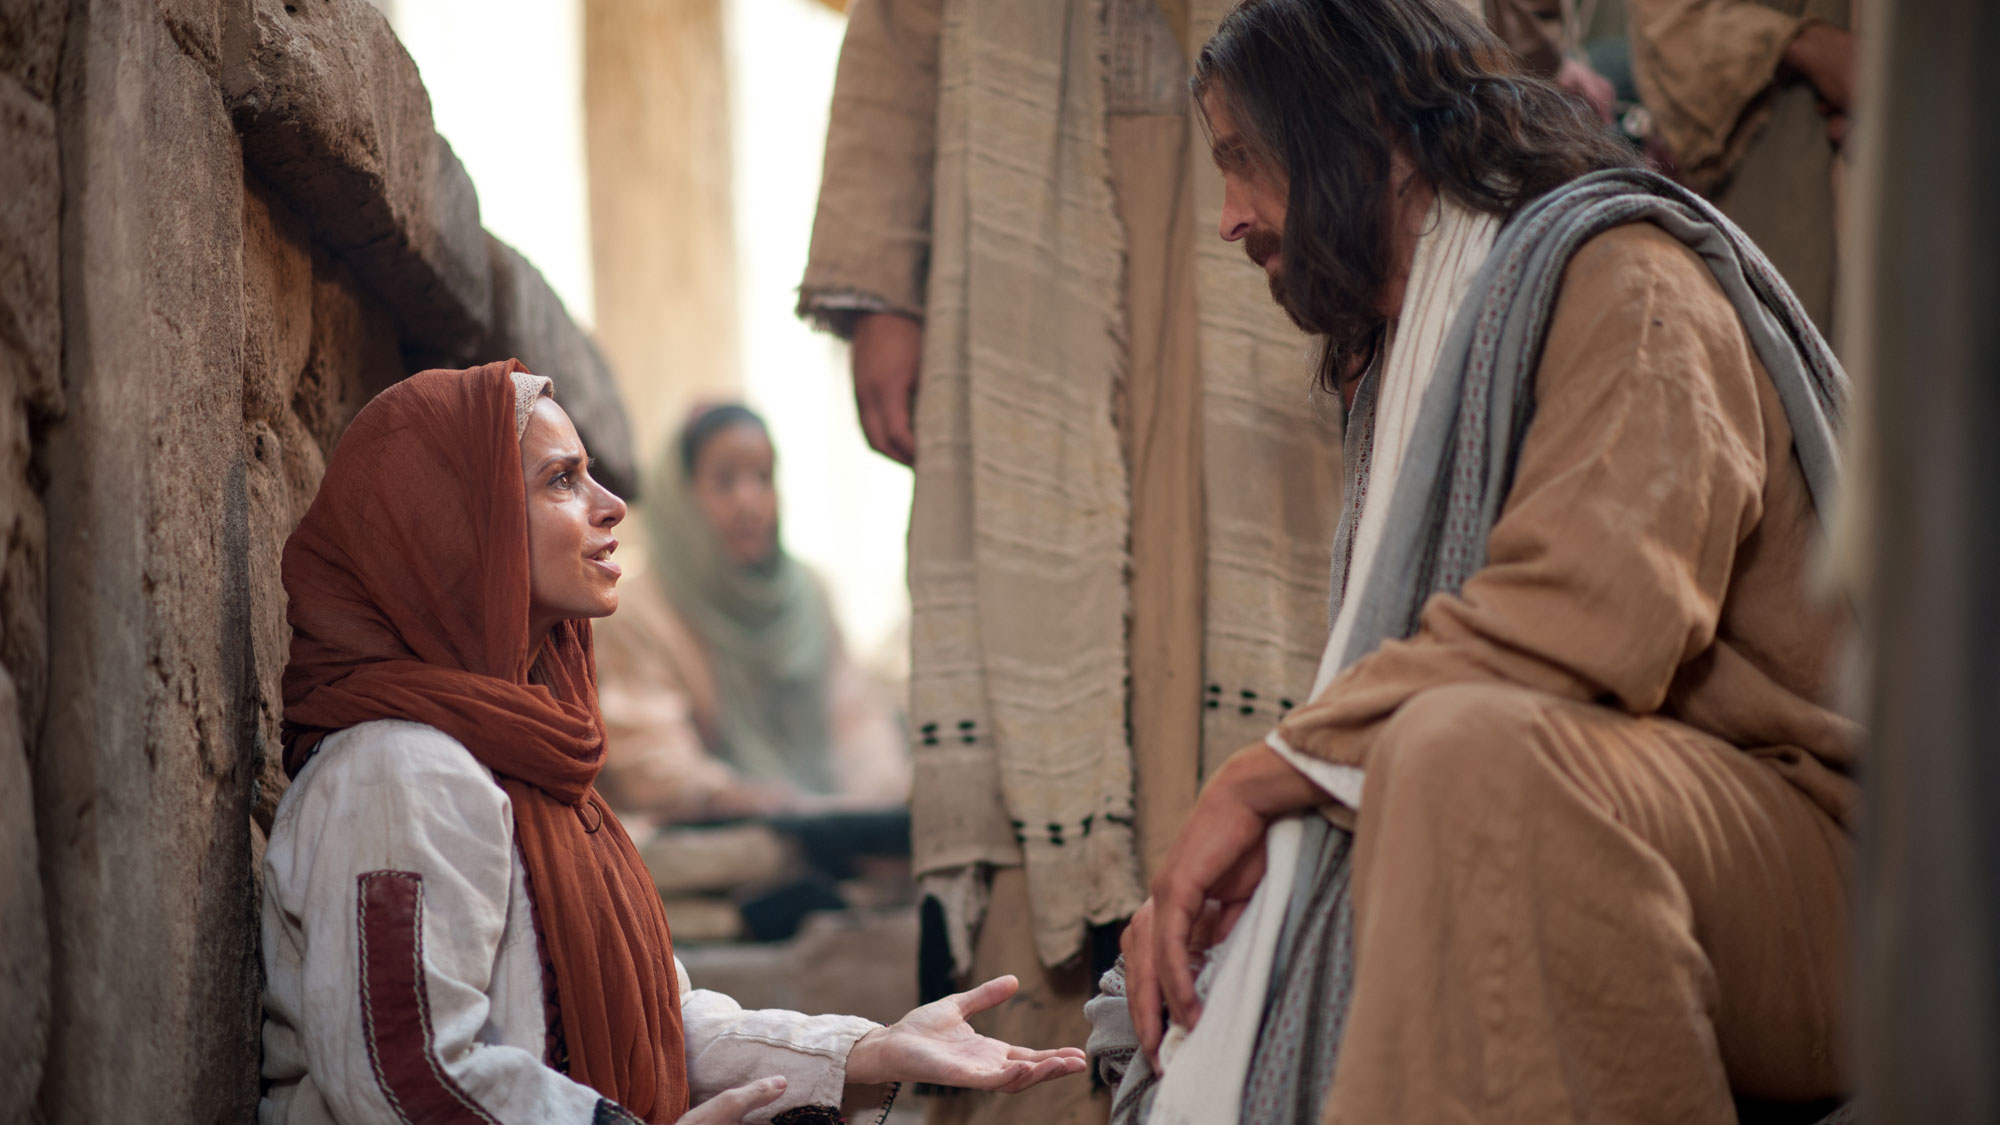 Jesus heals a woman with an issue of blood. Image via lds.org